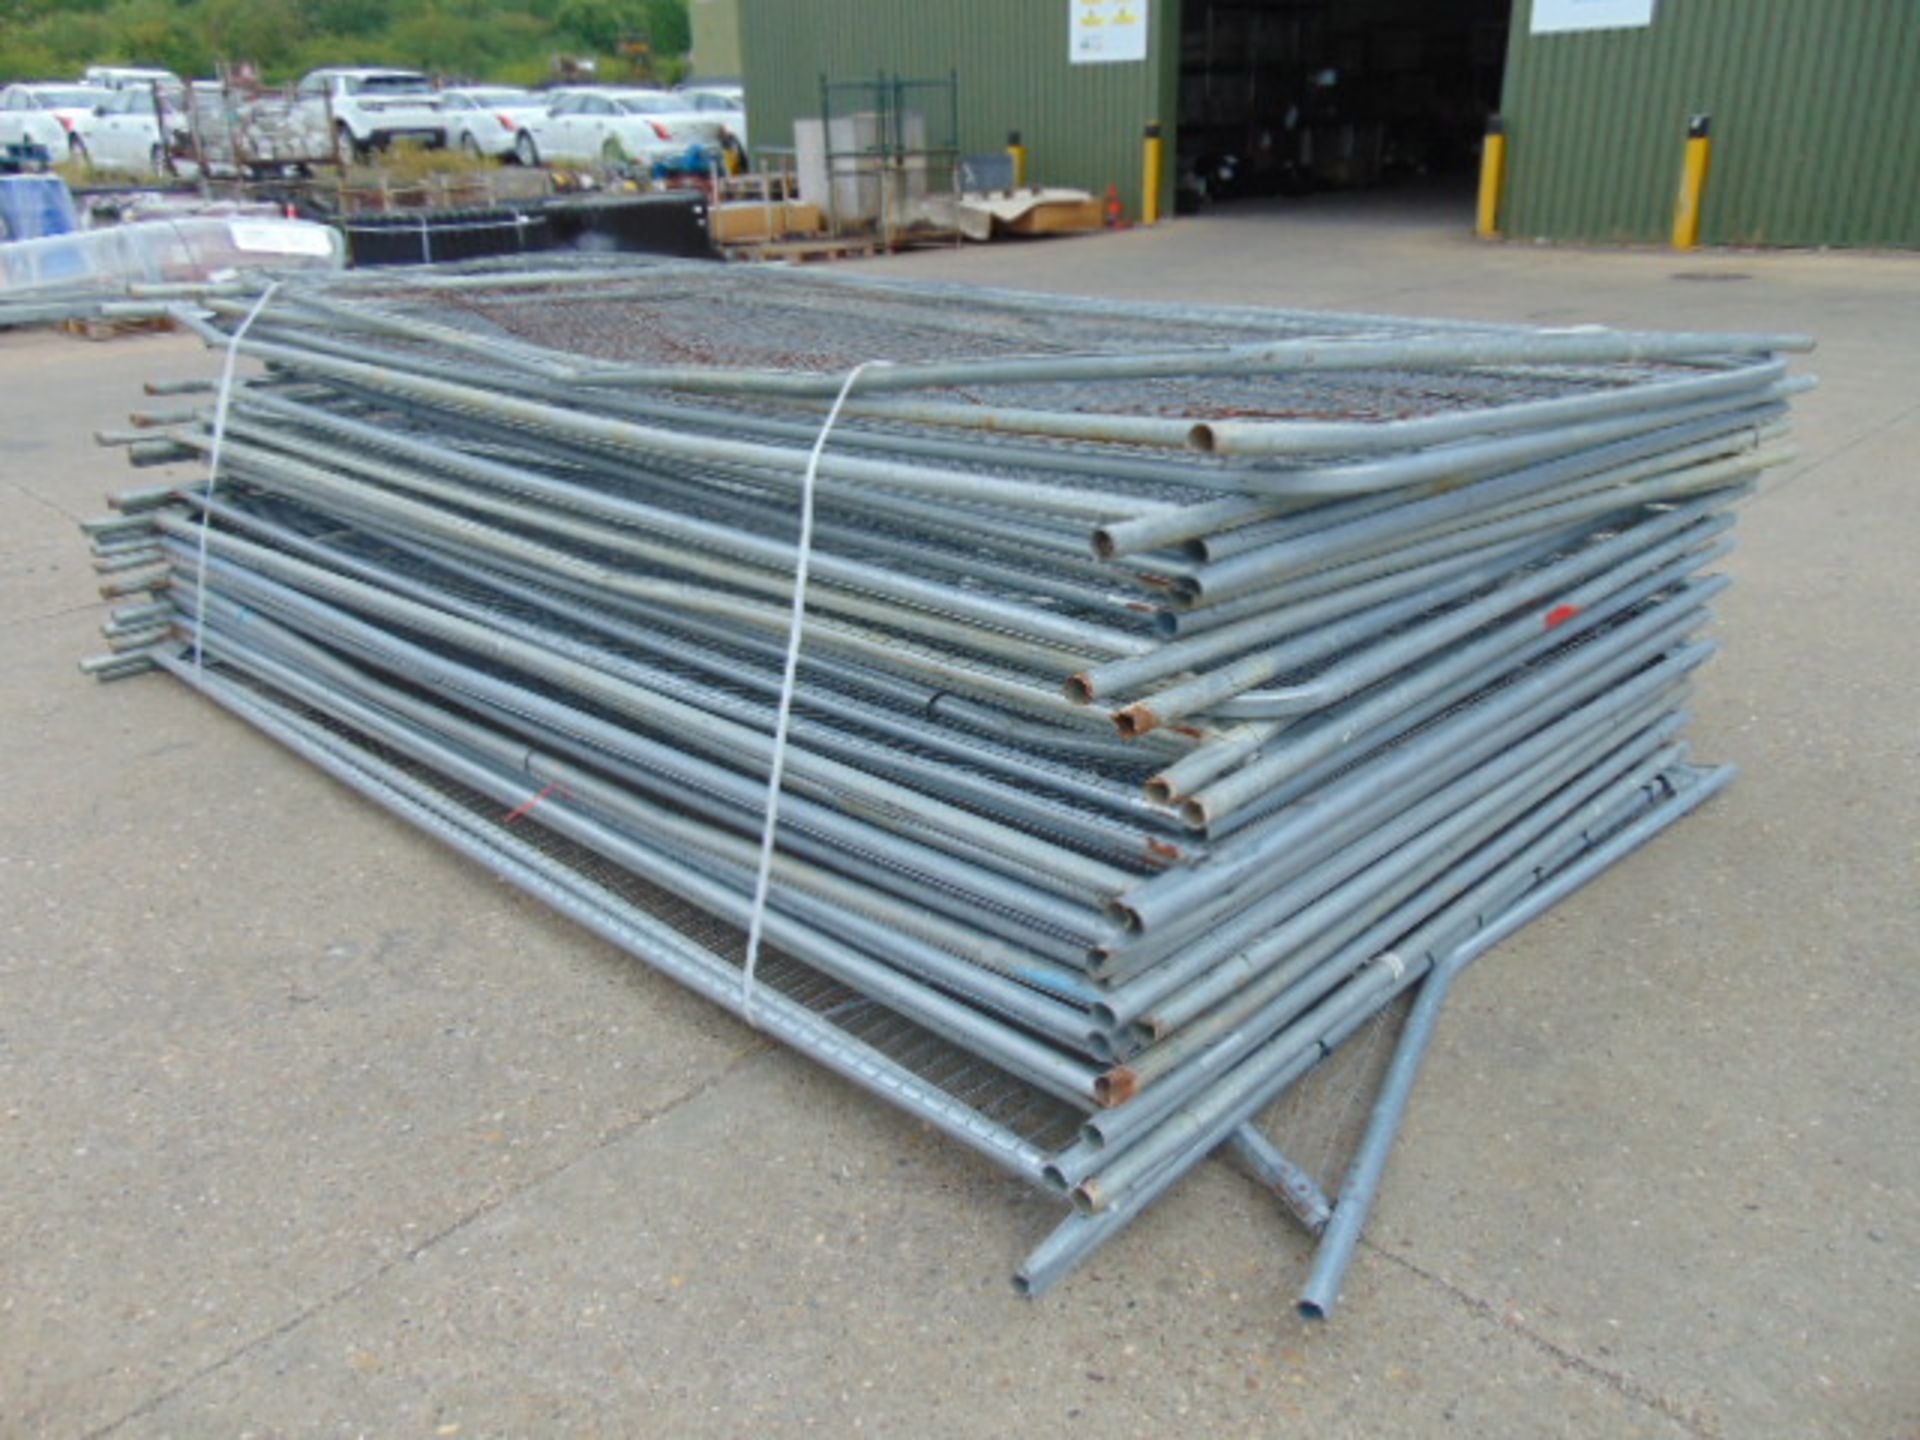 30 x Heras Style Galvanised Fencing Panels 3.5m x 2m - Image 3 of 5